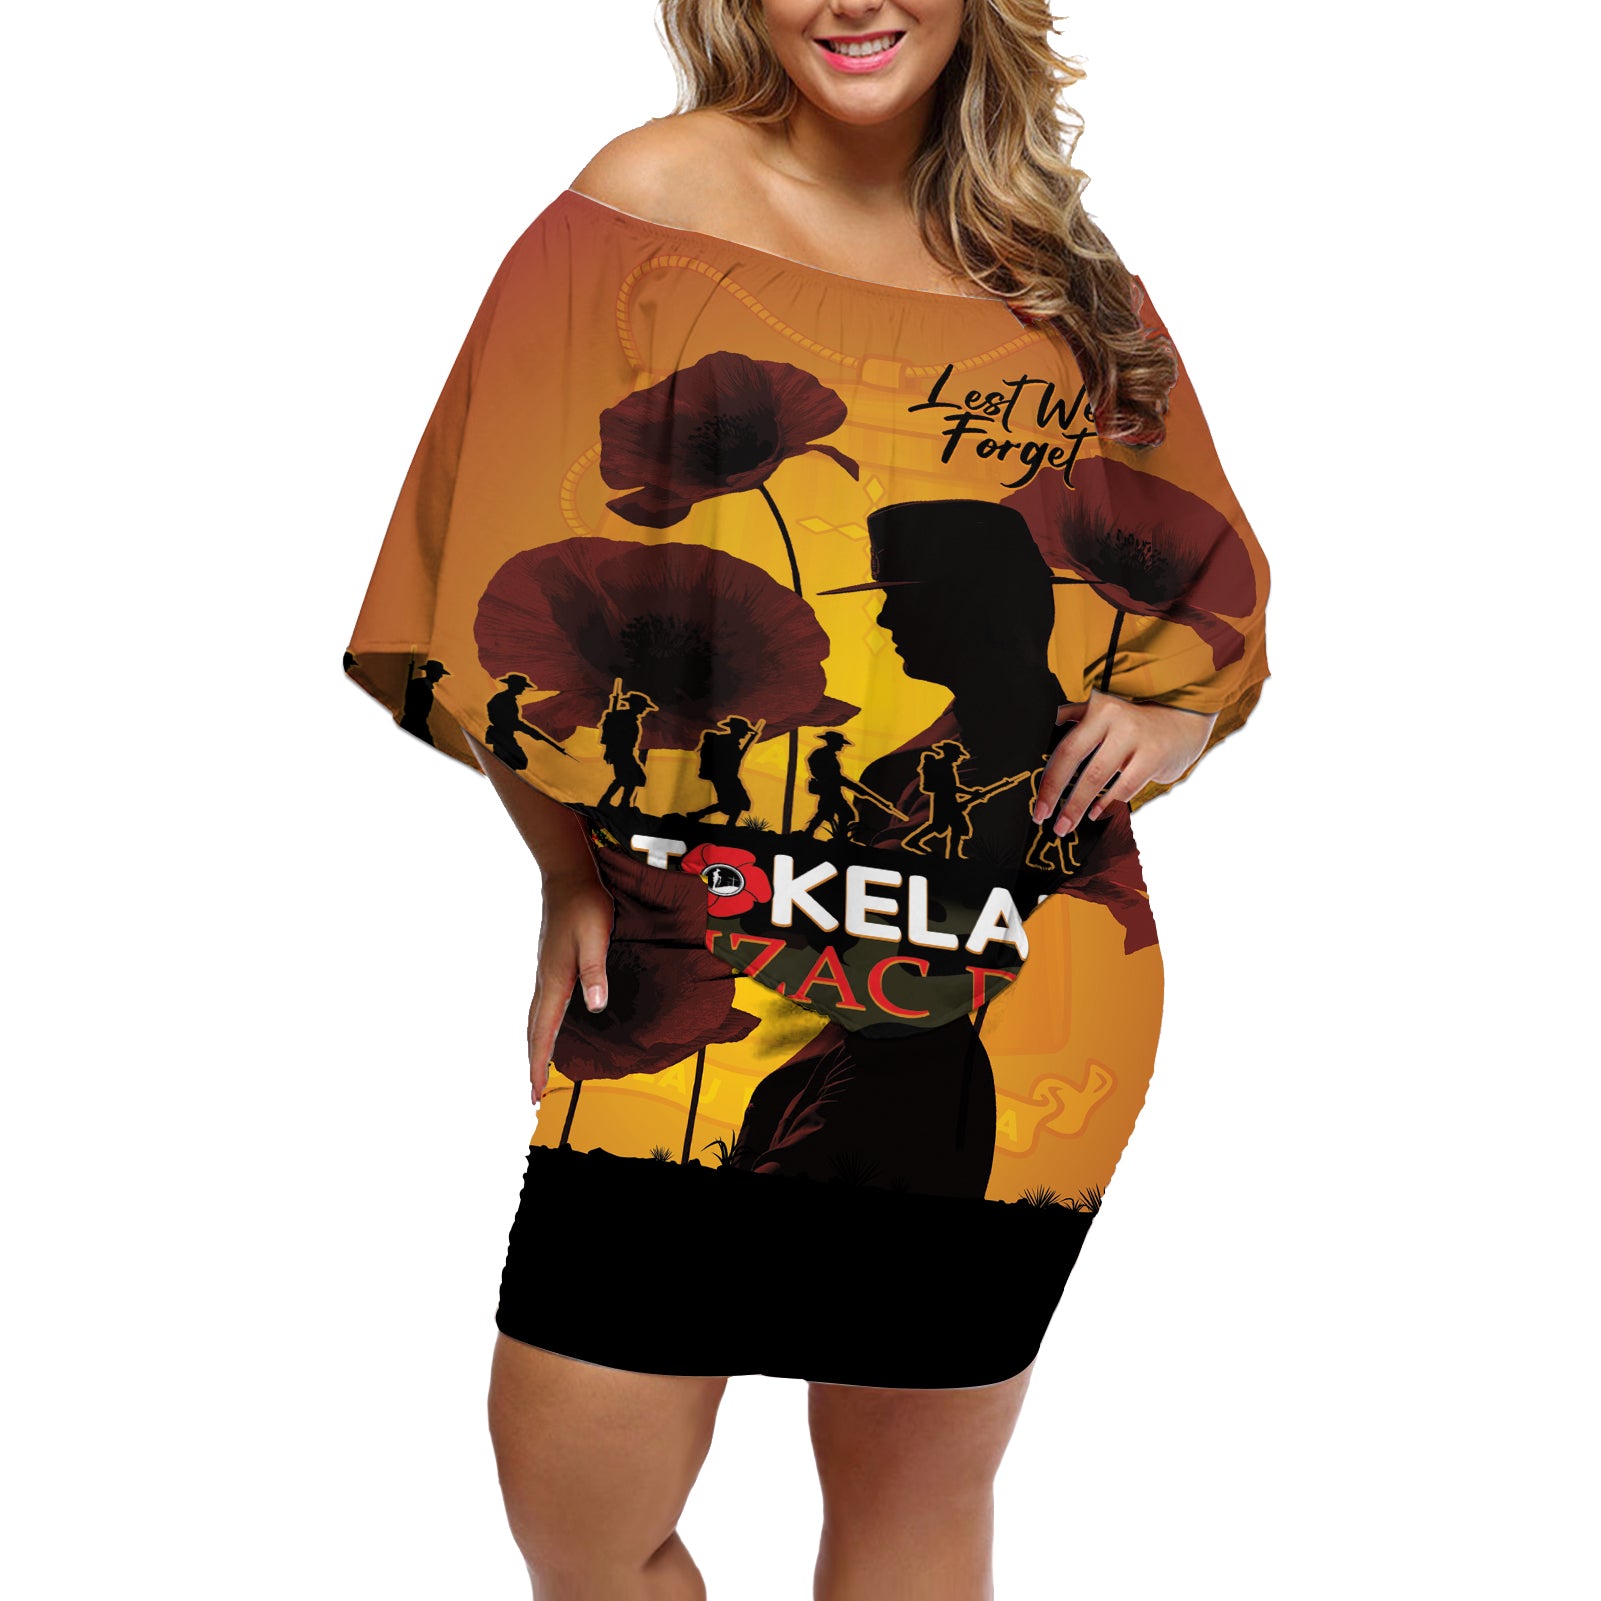 Tokelau ANZAC Day Off Shoulder Short Dress Camouflage With Poppies Lest We Forget LT14 Women Yellow - Polynesian Pride